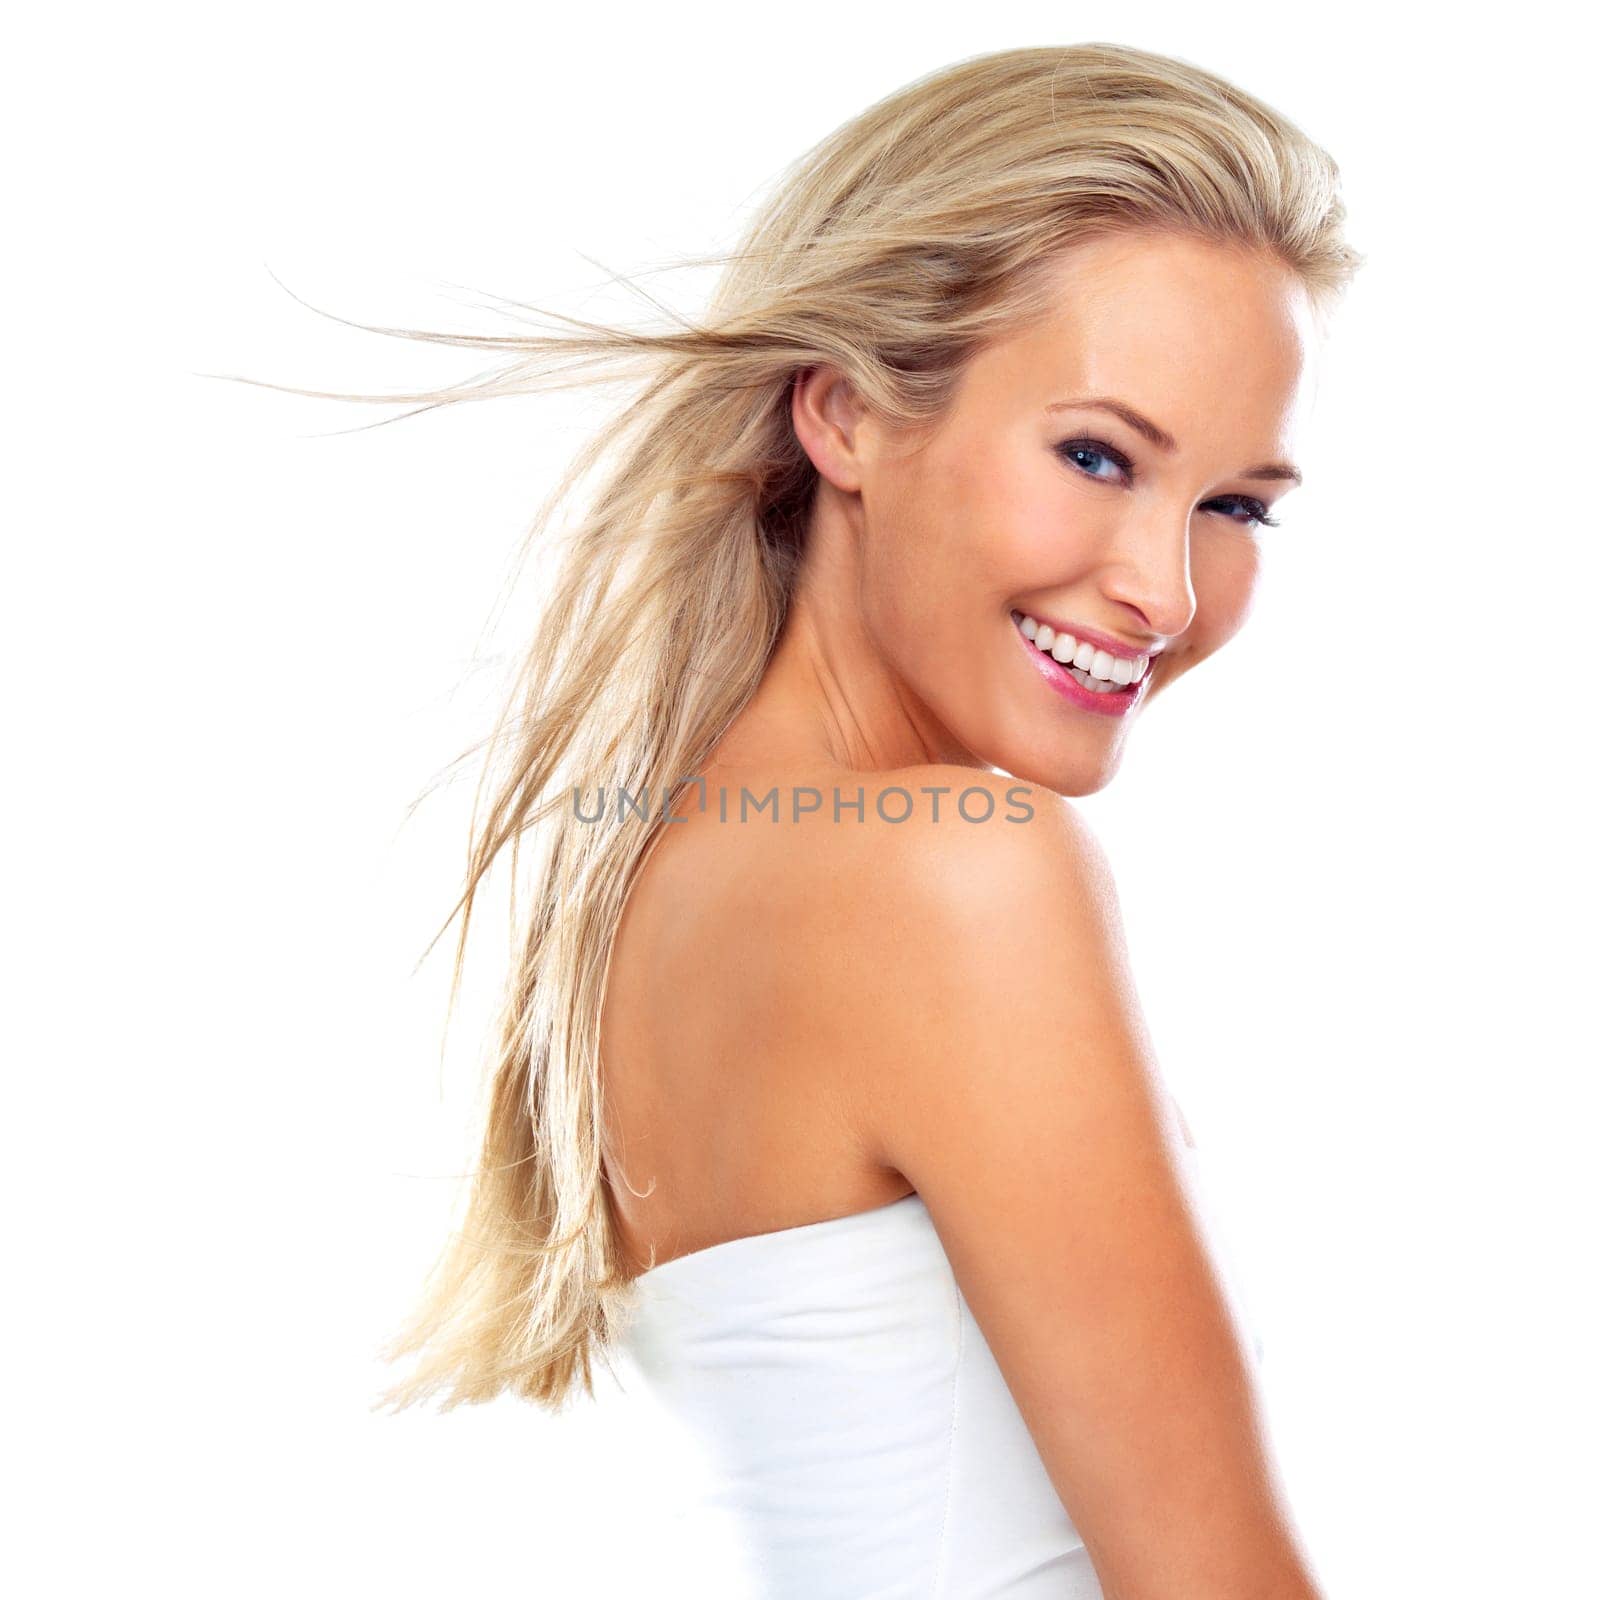 Portrait, hair care and happy woman in wind for beauty, skincare or body health isolated on a white studio background. Face, smile and hairstyle of blonde person in salon with makeup or cosmetics.